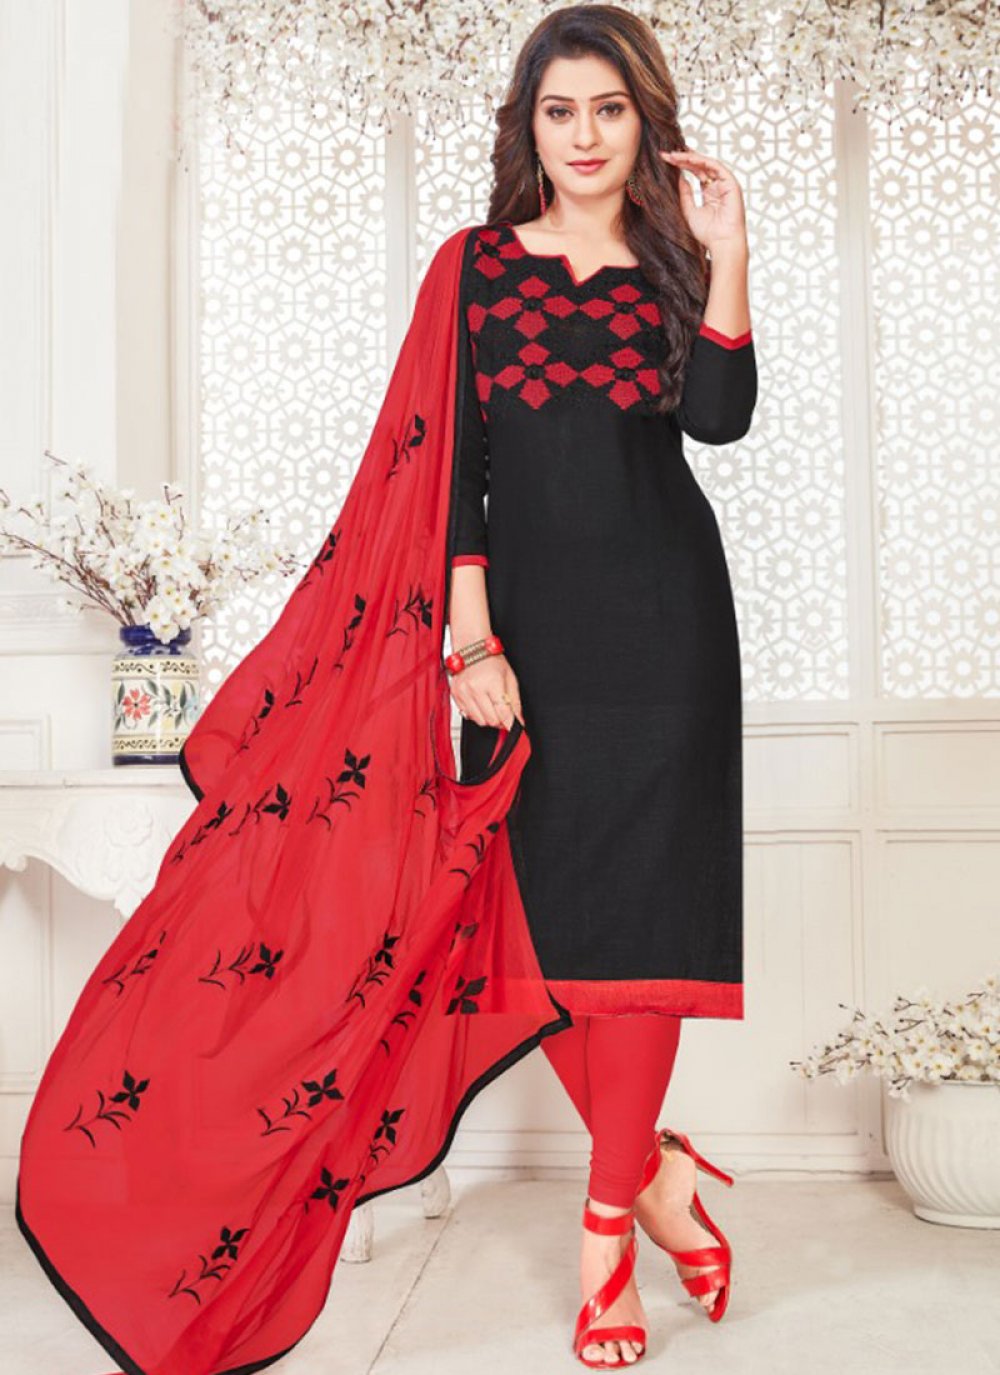 Black Georgette Embroidered Churidar Suit buy from India - New Arrivals